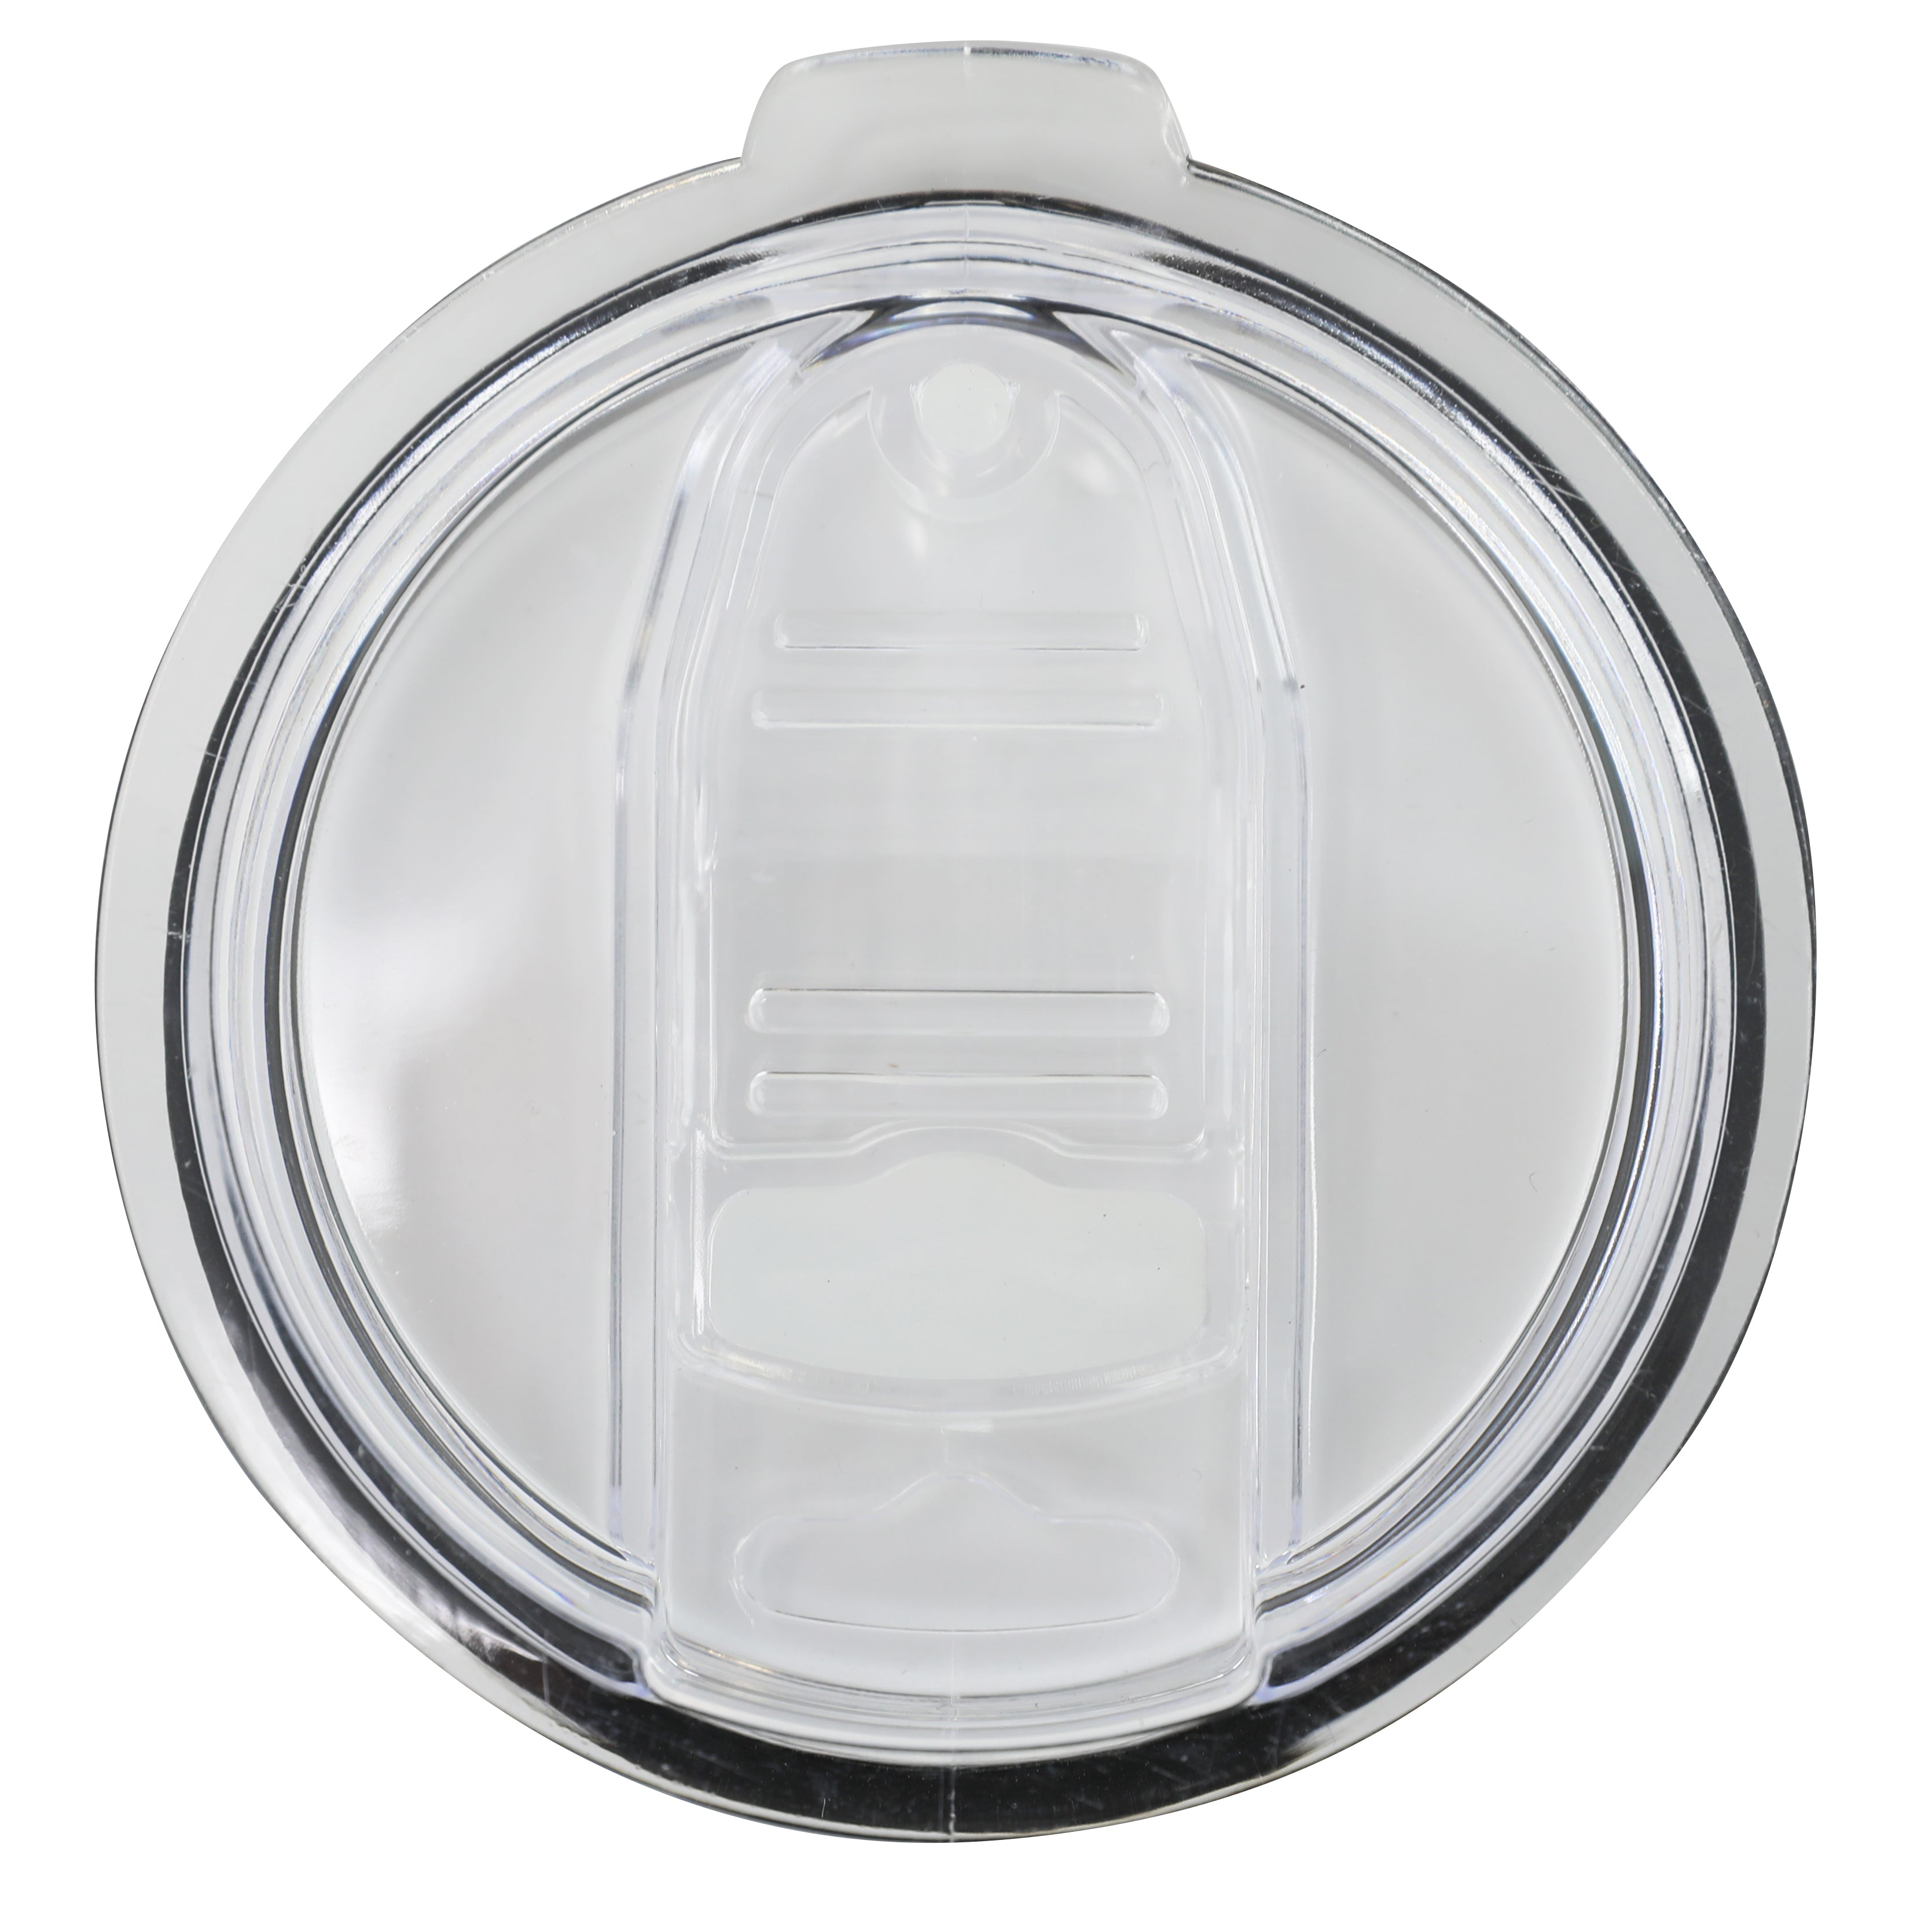 Replacement Lid for 20oz / 12oz Tumblers, Coffee or Wine 